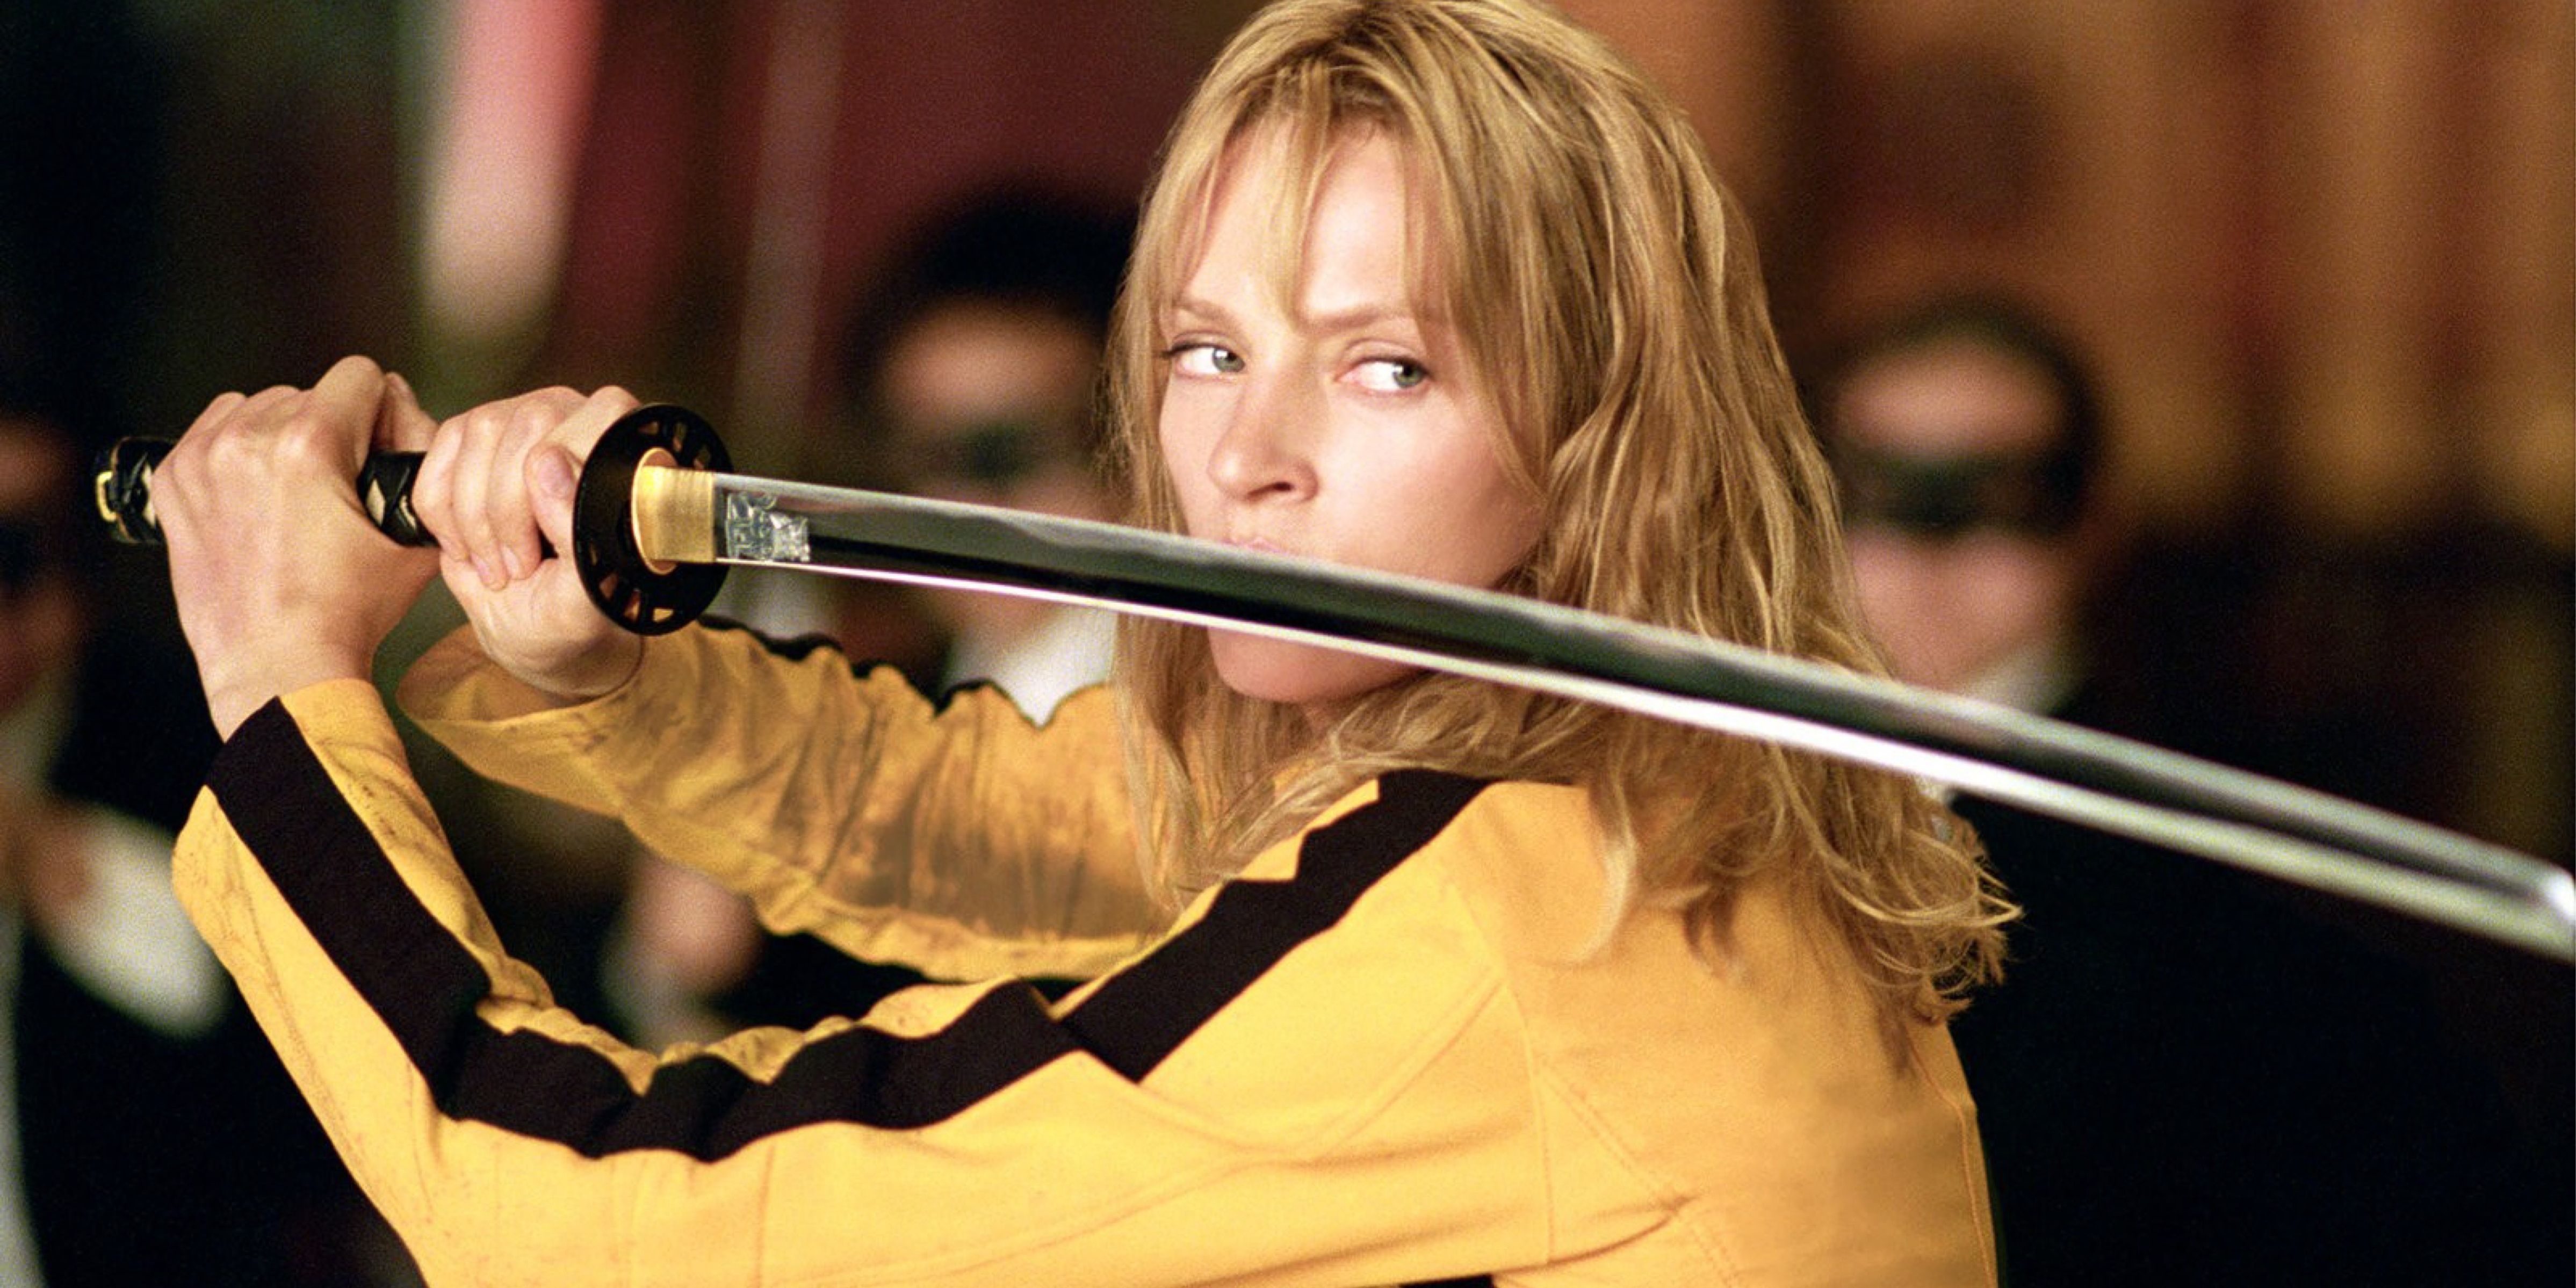 The Bride fights with her machete in her iconic yellow motorbike suit in Kill Bill